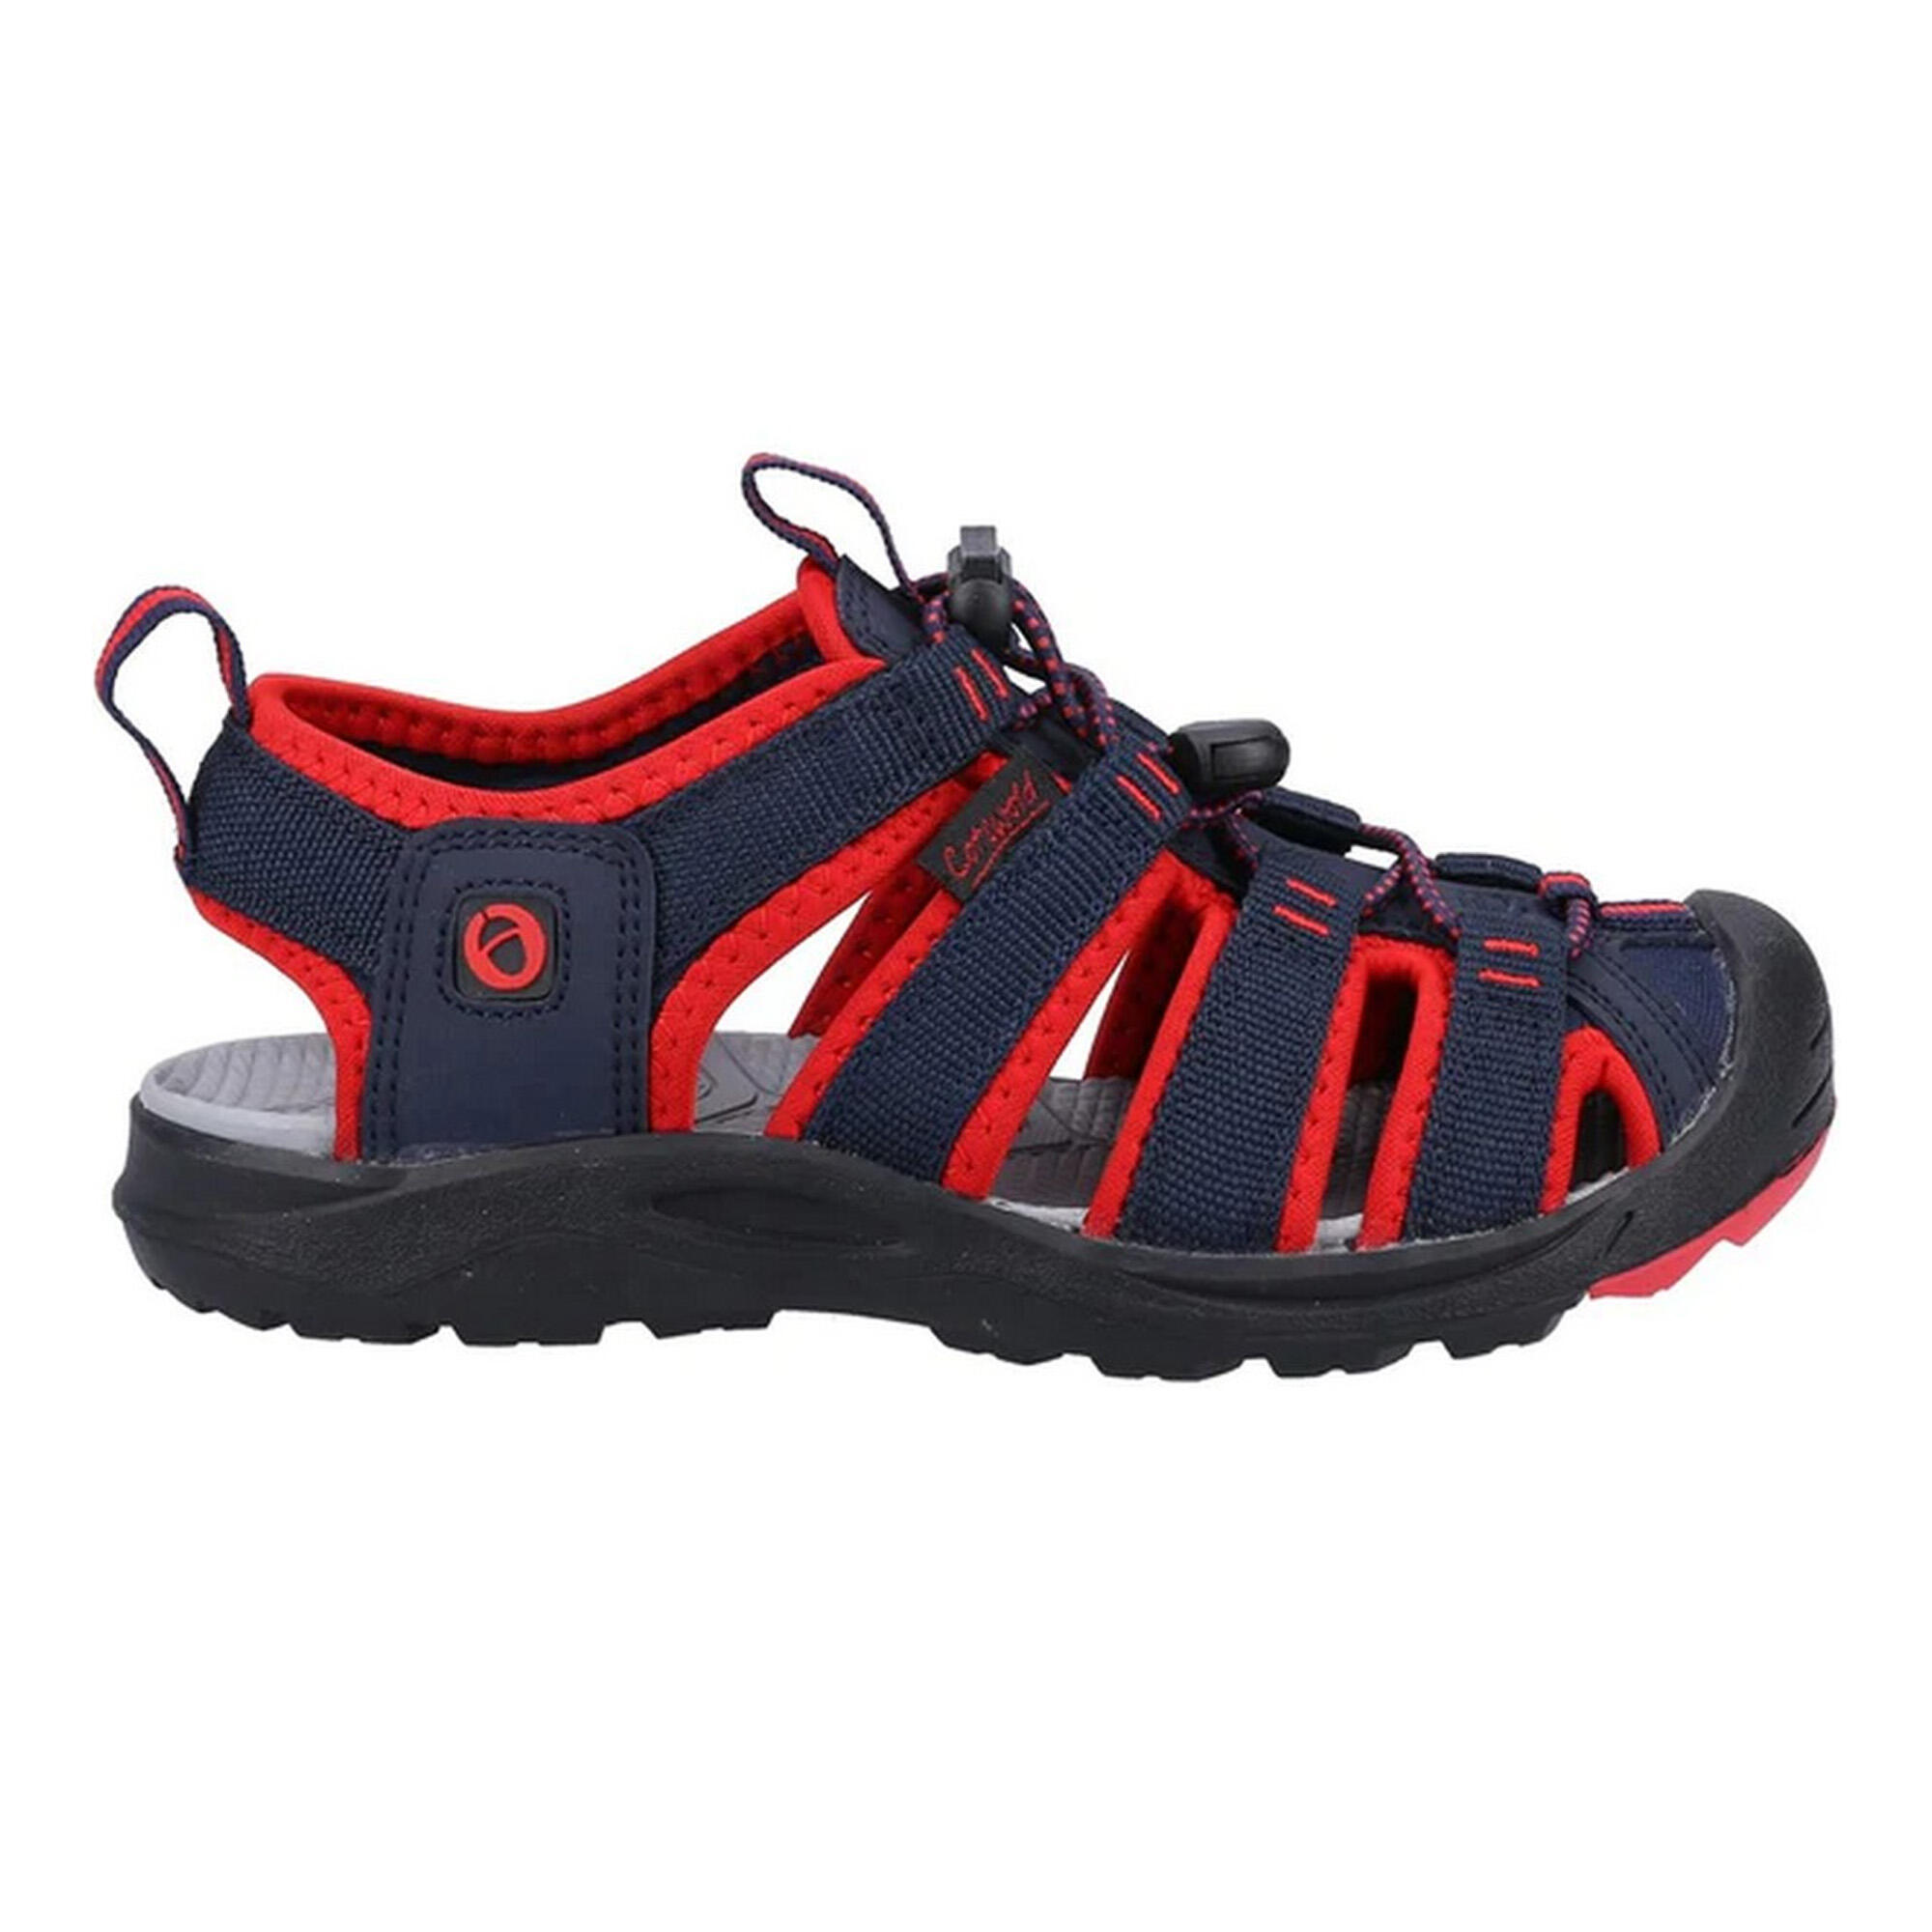 Childrens/Kids Marshfield Recycled Sandals (Navy/Red) 3/5